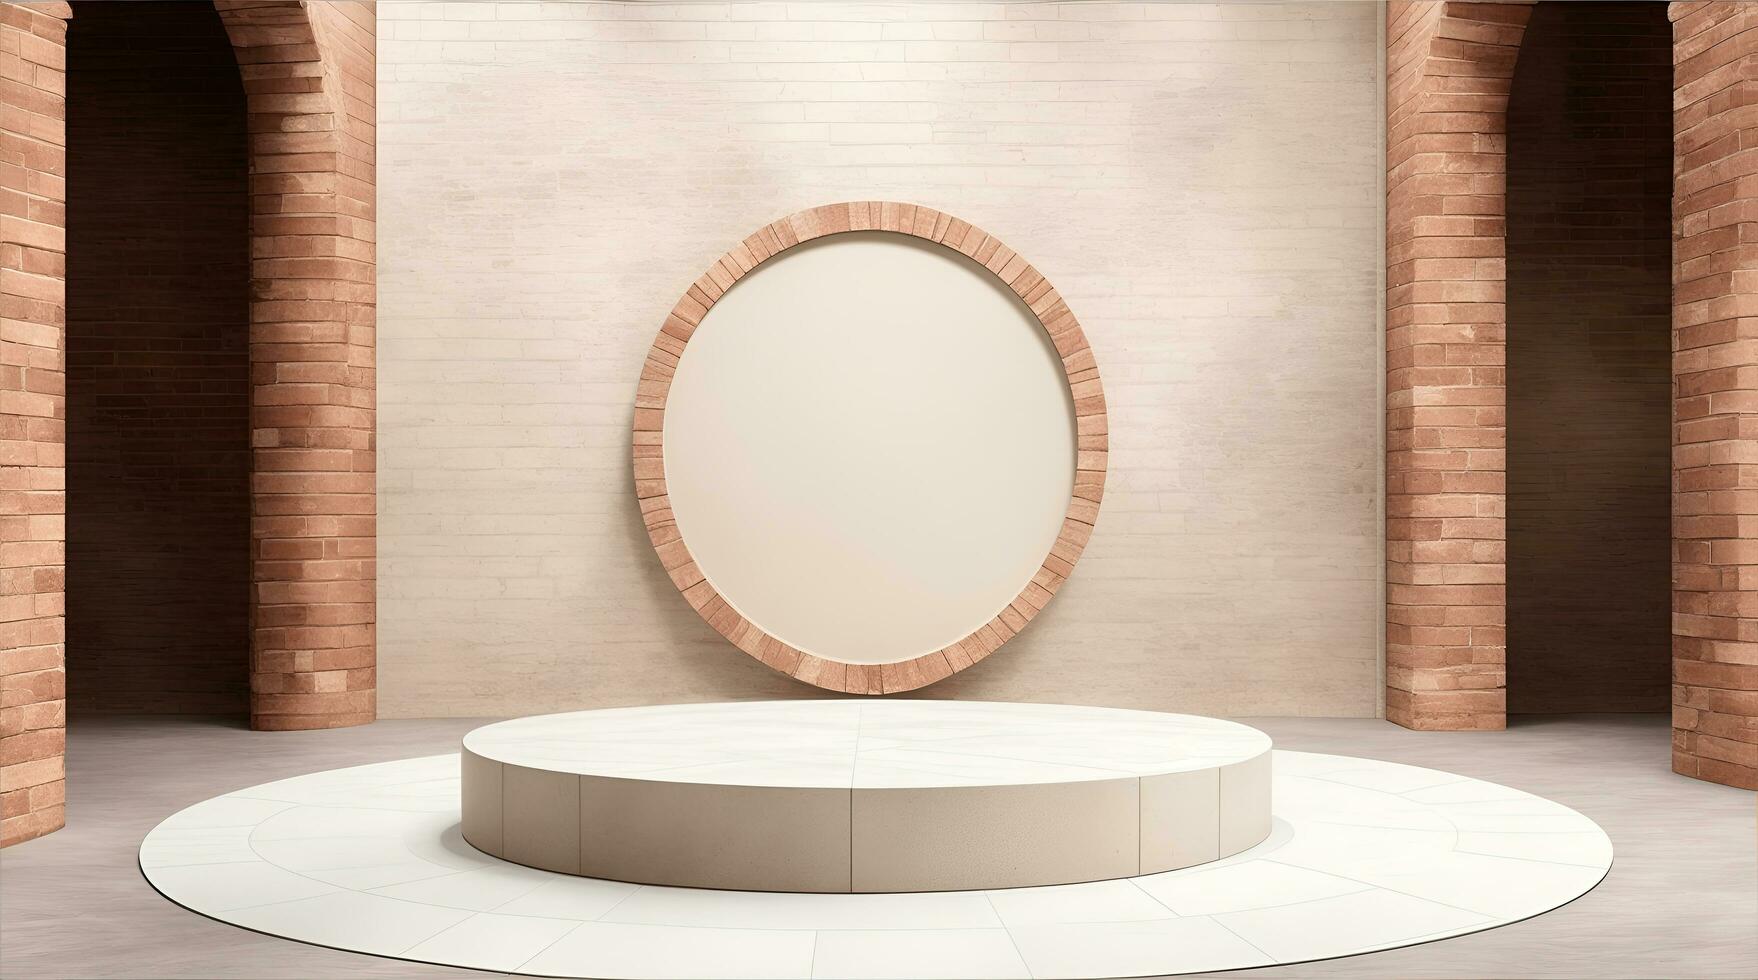 AI Generative, pedestal backdrop with a natural stone and brickwall show scene, minimalist podium background, abstract empty product display photo